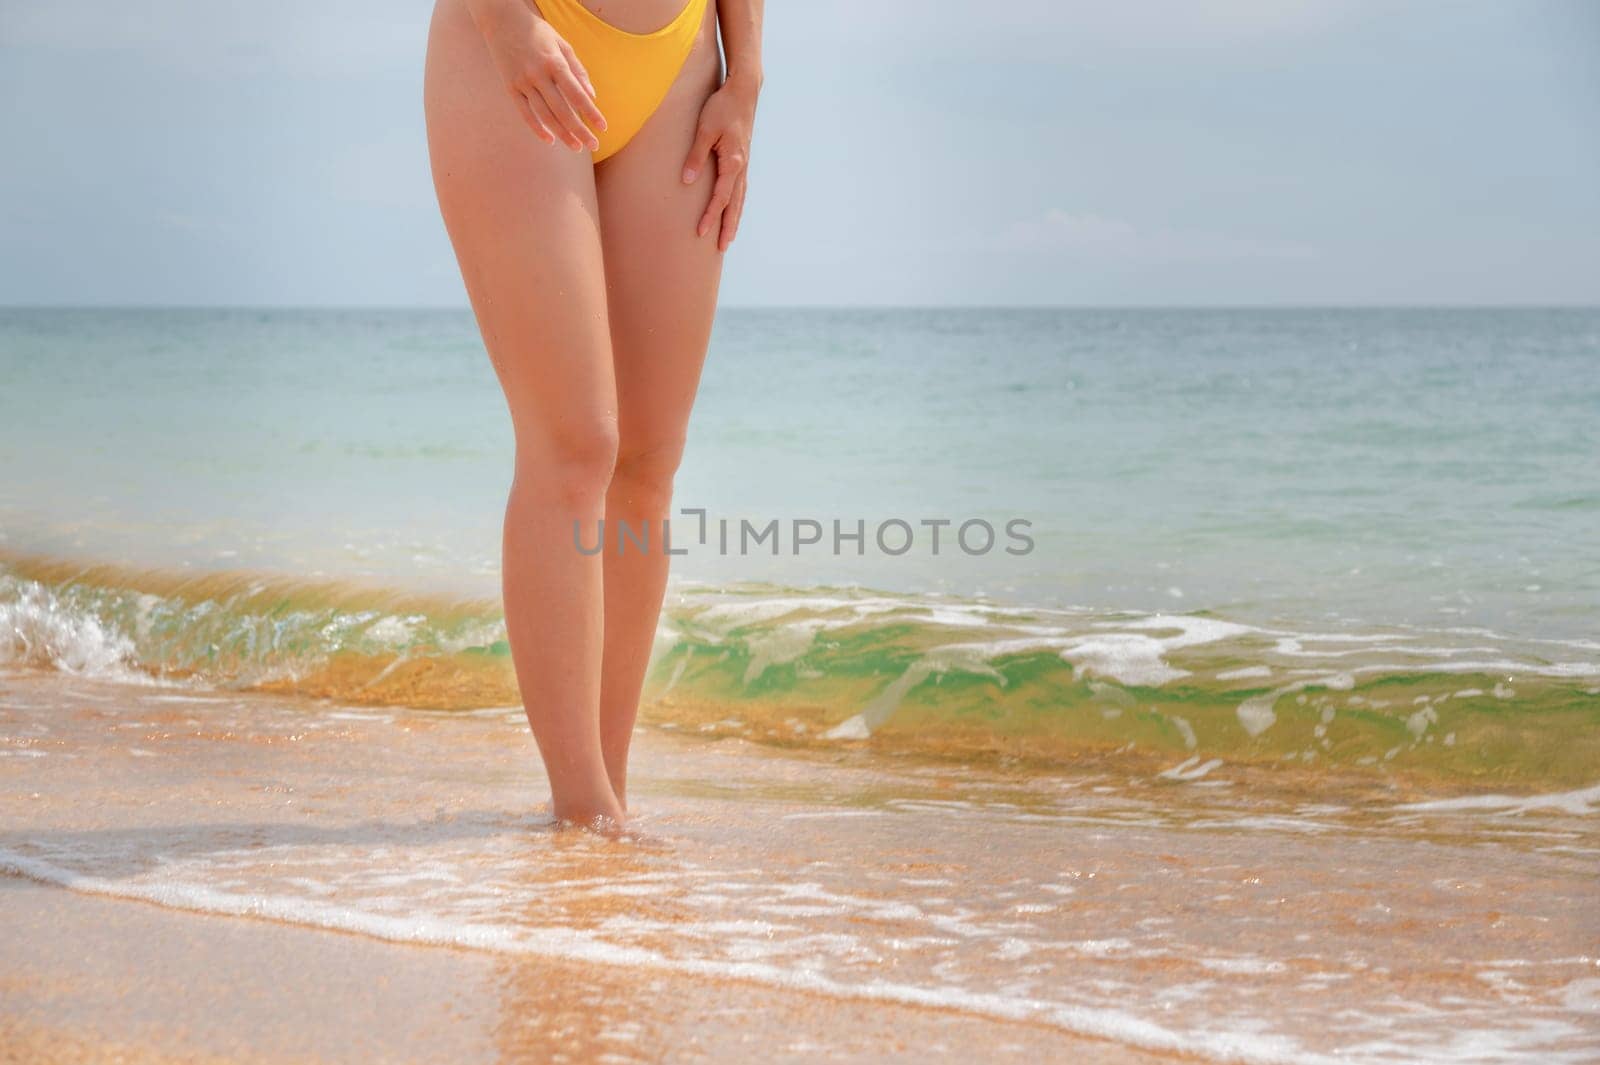 female legs stand on the seashore, sandy beach and sunshine, summer vacation idea by the ocean, sea waves. sexy female legs enjoying leisure time by yanik88